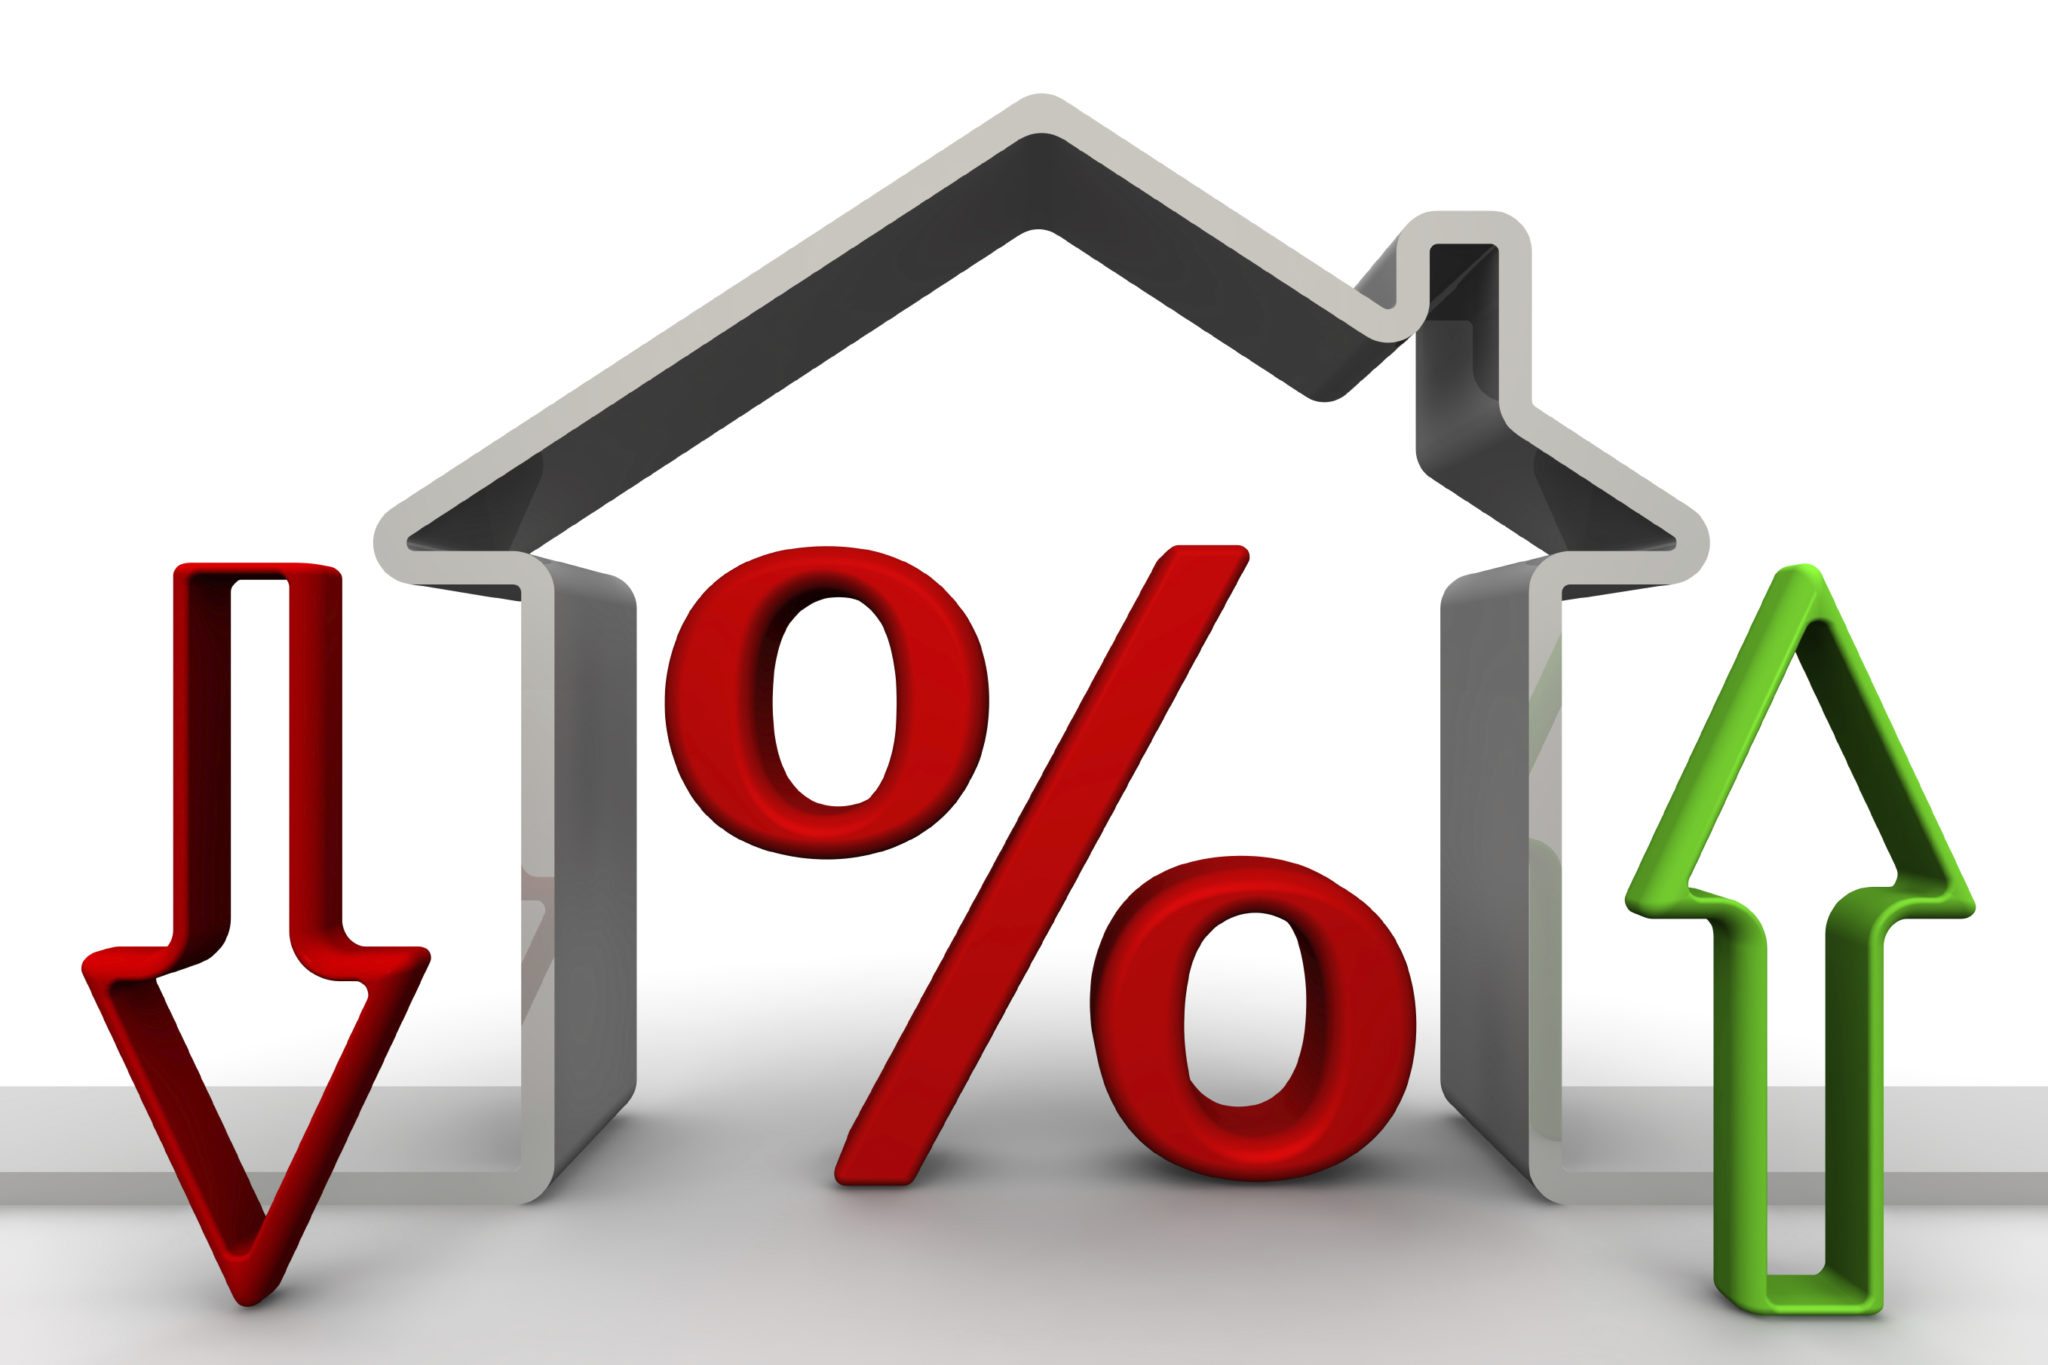 Changes percent on mortgages. Concept